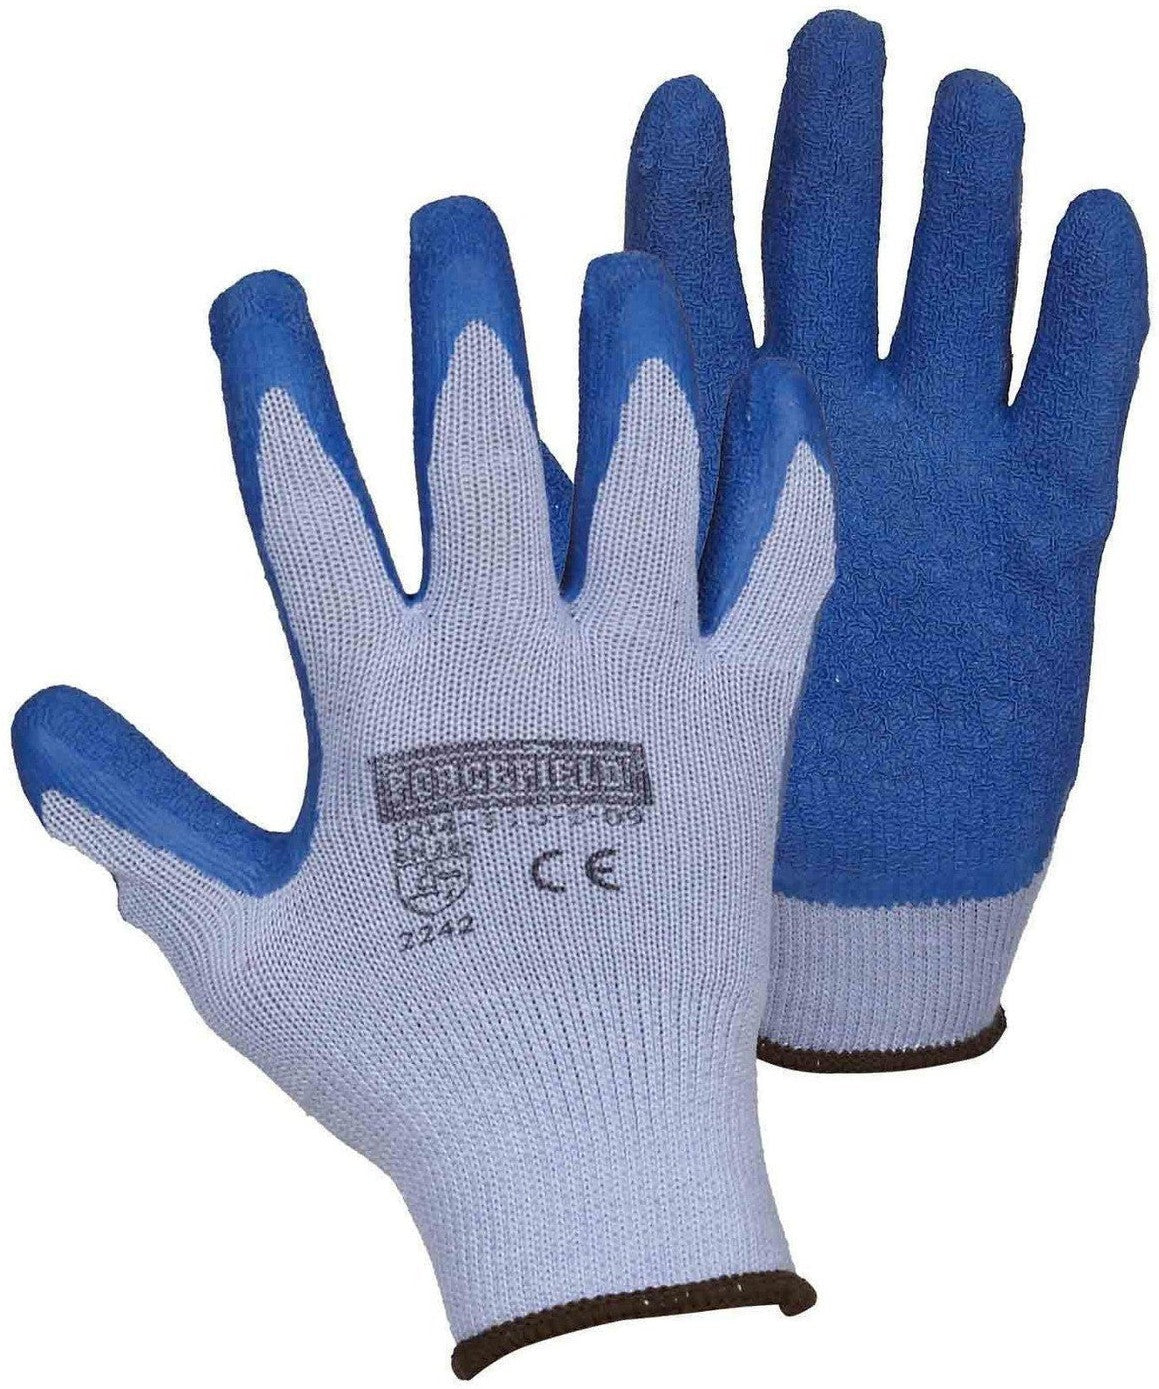 Forcefield - Size 10 Latex Palm Coated With Blue Crinkle String Knit Work Gloves - 004-310-I-10